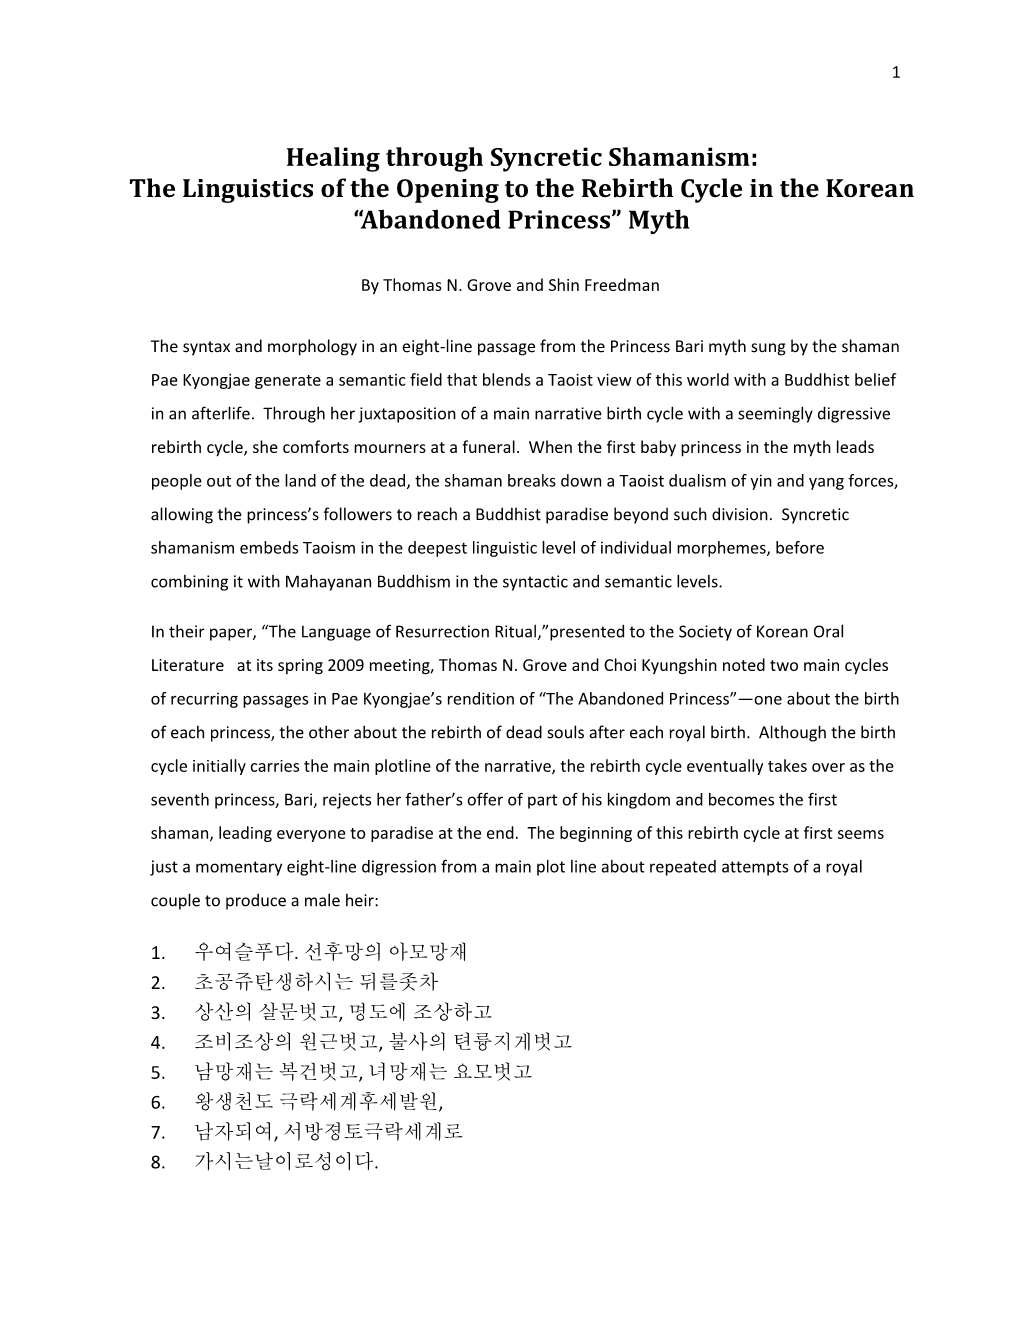 Healing Through Syncretic Shamanism: the Linguistics of the Opening to the Rebirth Cycle in the Korean “Abandoned Princess” Myth